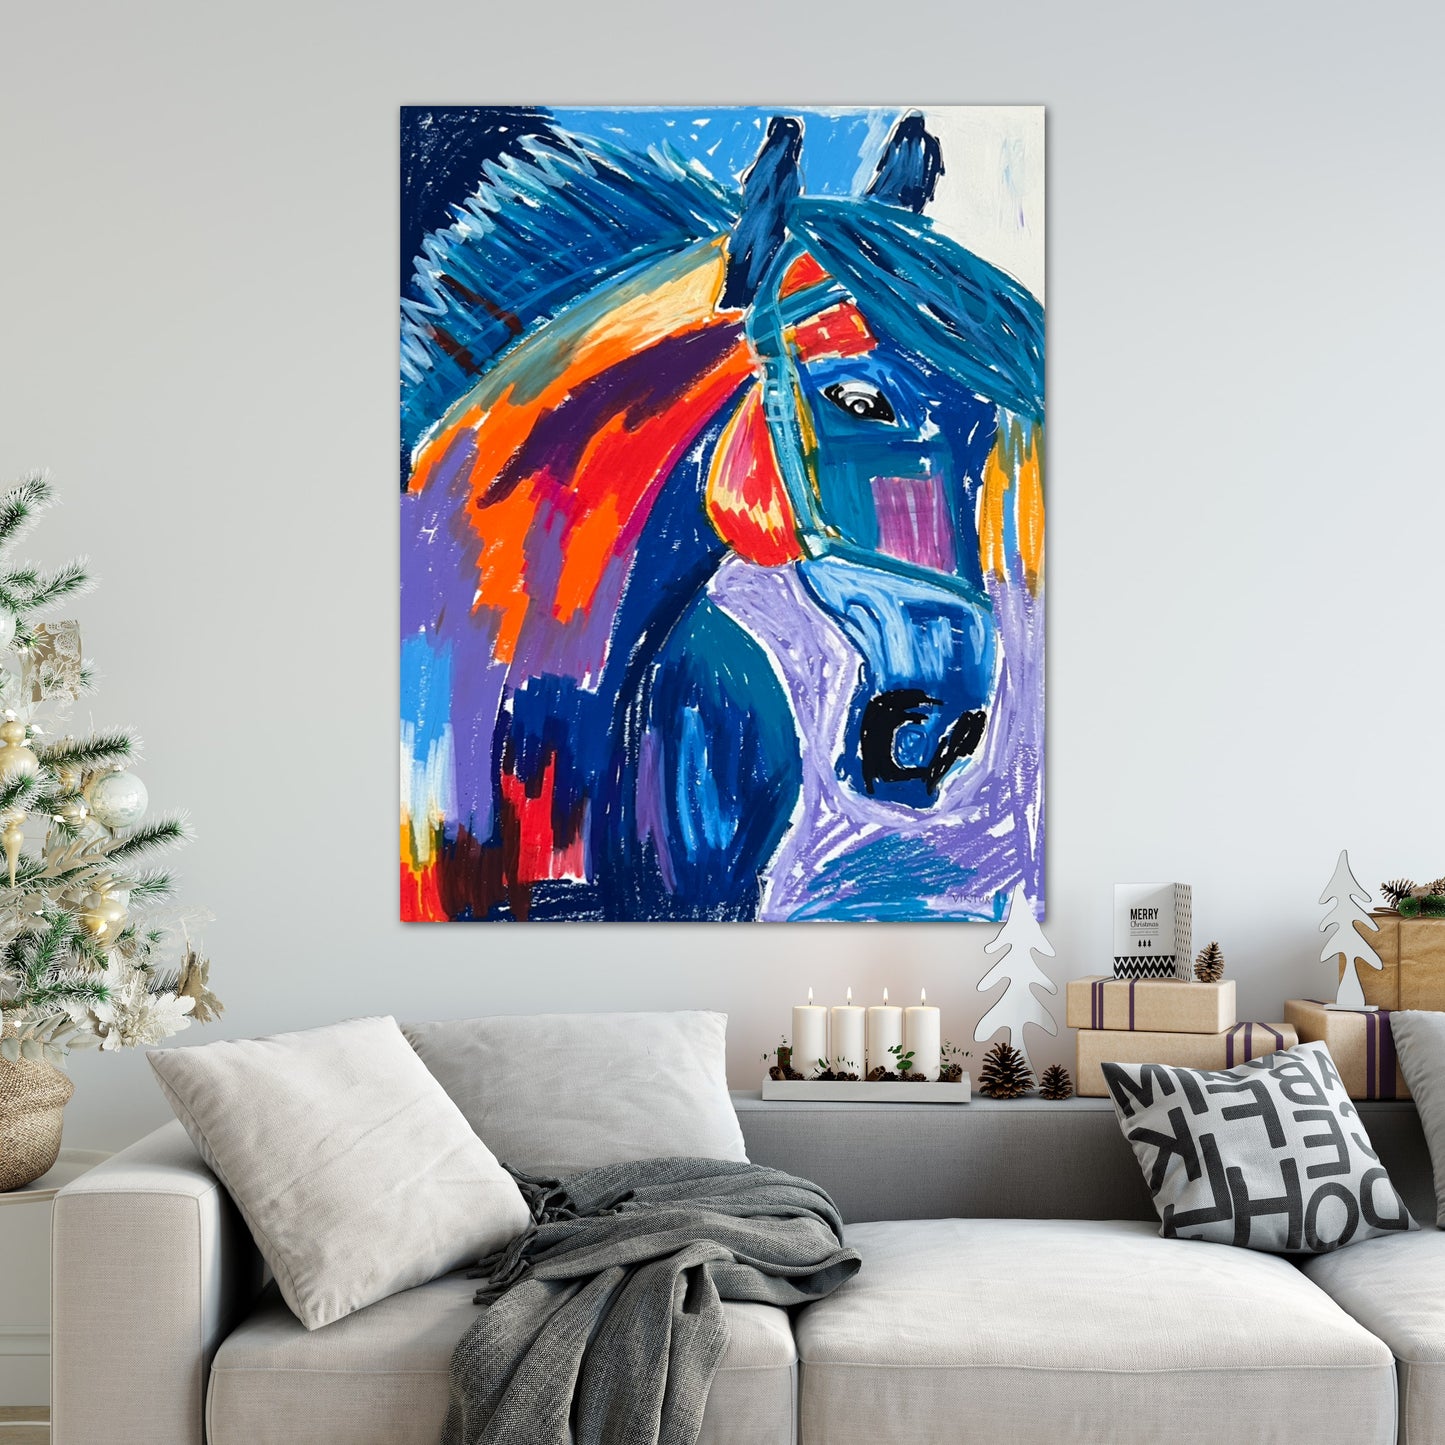 The Blue Horse - fine prints and canvas prints in more size